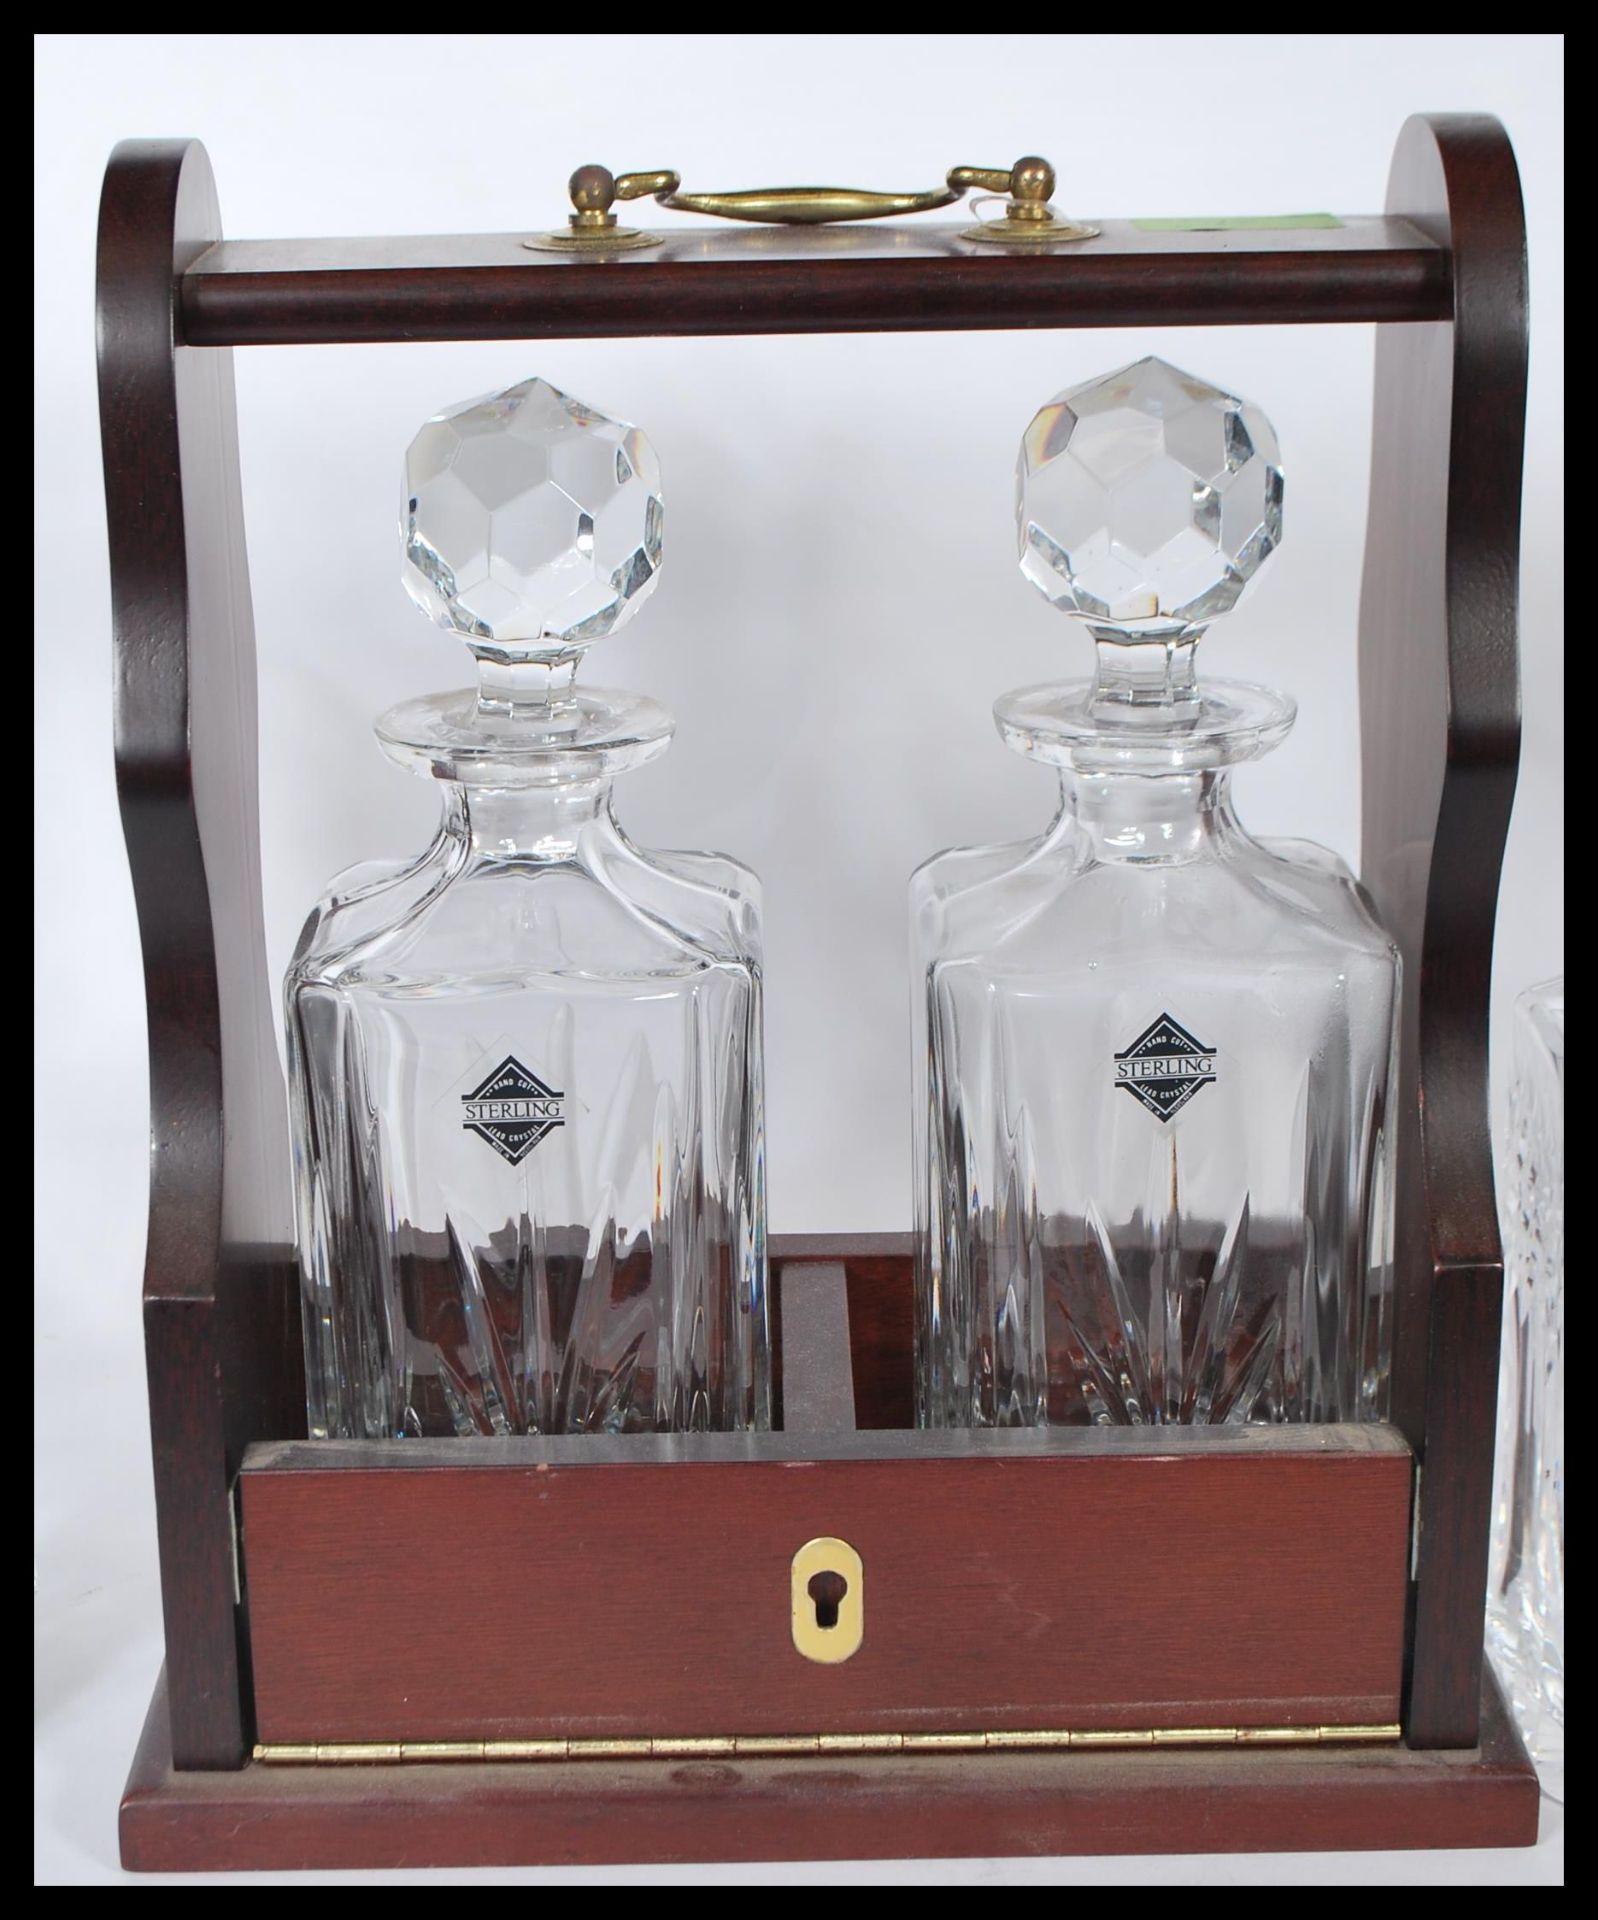 A collection of 20th century decanters to include facet cut, cut glass crystal and other shapes - Image 5 of 7